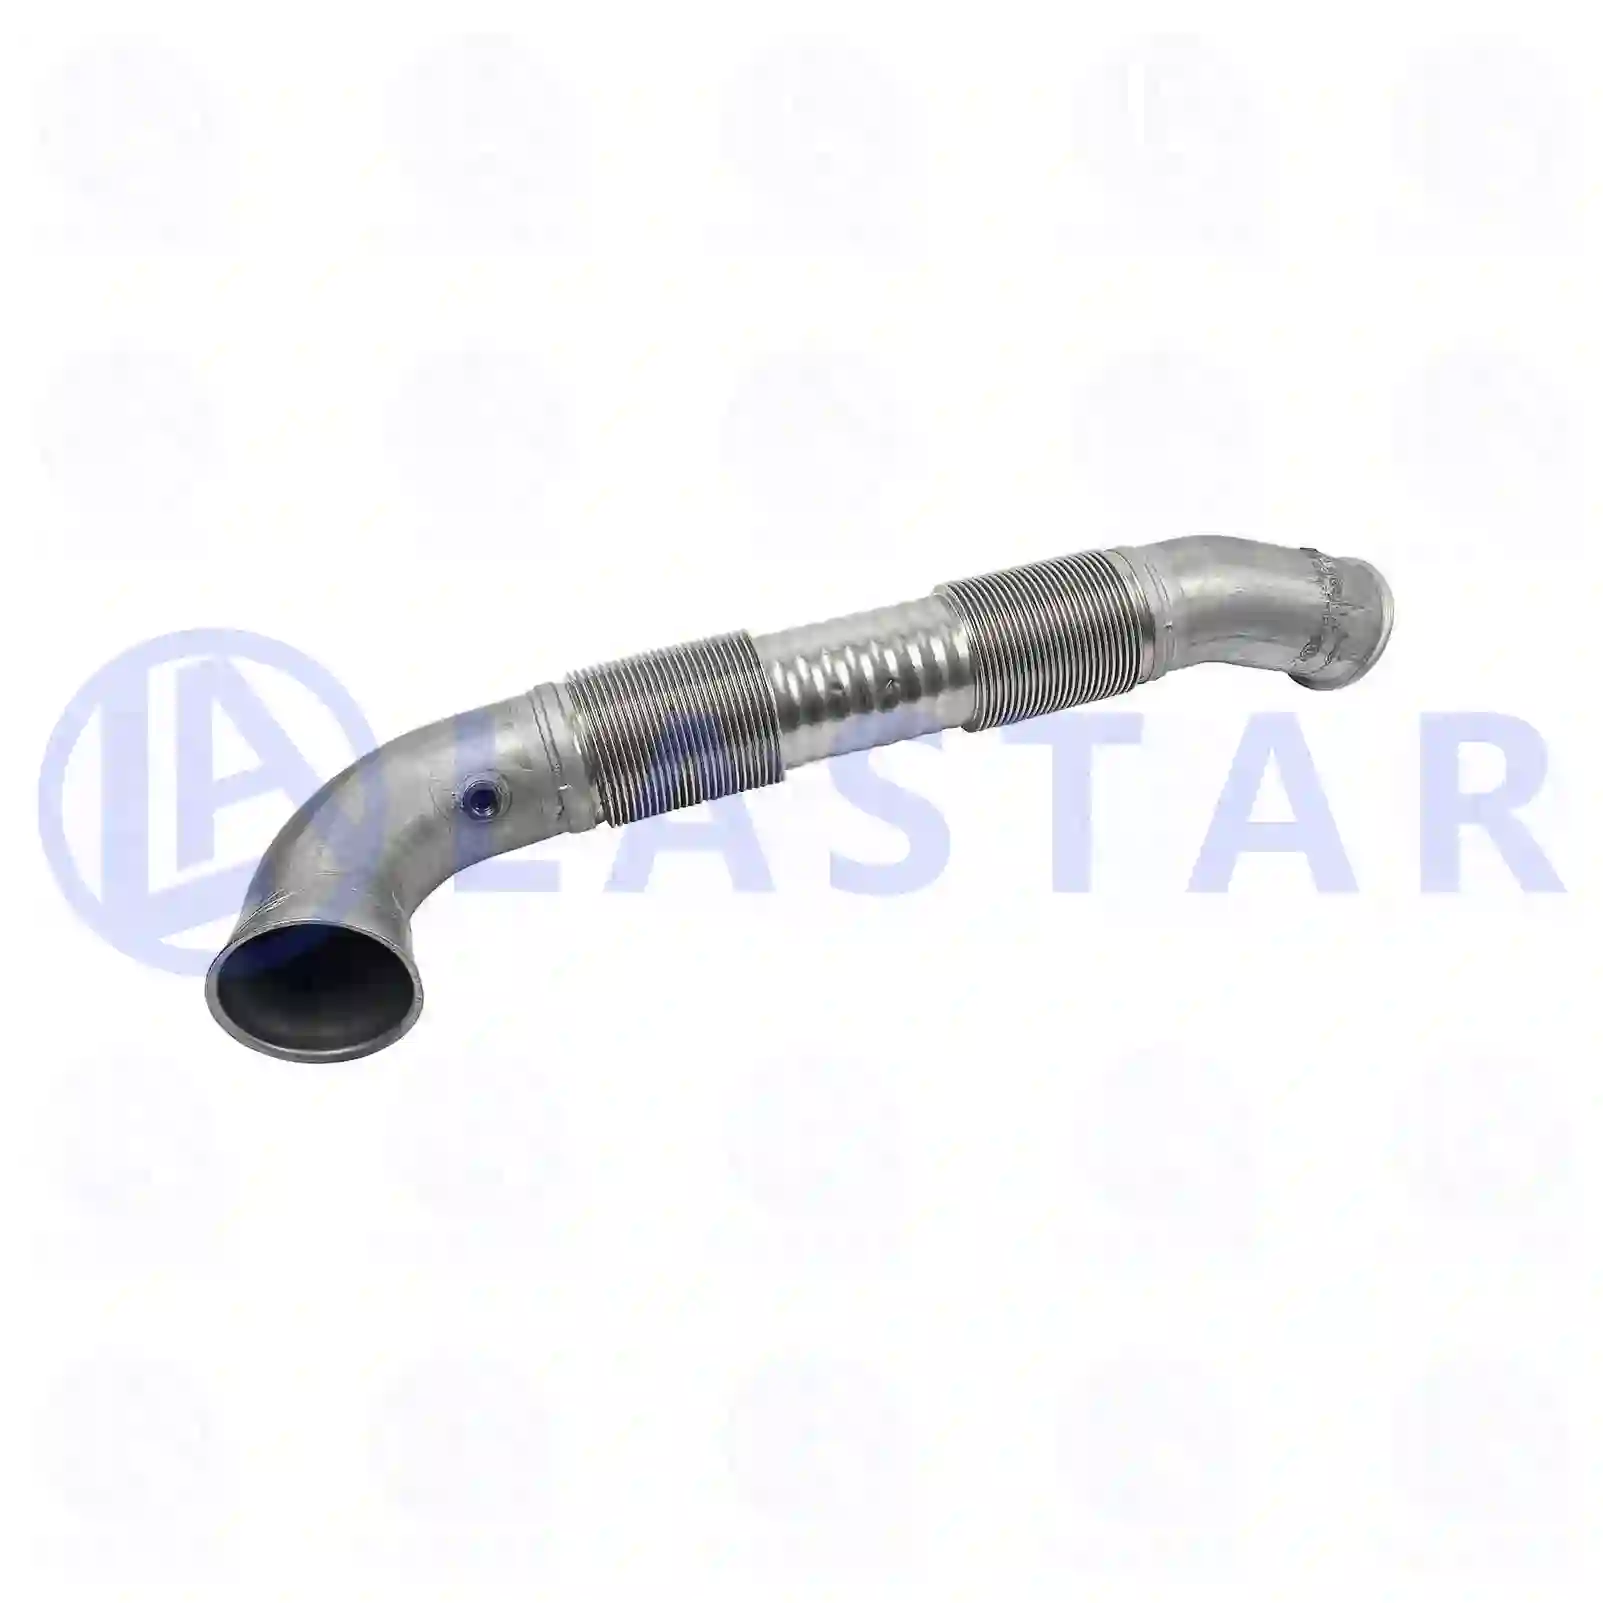 Exhaust pipe, 77707032, 1868602, 2276712, ZG10292-0008 ||  77707032 Lastar Spare Part | Truck Spare Parts, Auotomotive Spare Parts Exhaust pipe, 77707032, 1868602, 2276712, ZG10292-0008 ||  77707032 Lastar Spare Part | Truck Spare Parts, Auotomotive Spare Parts